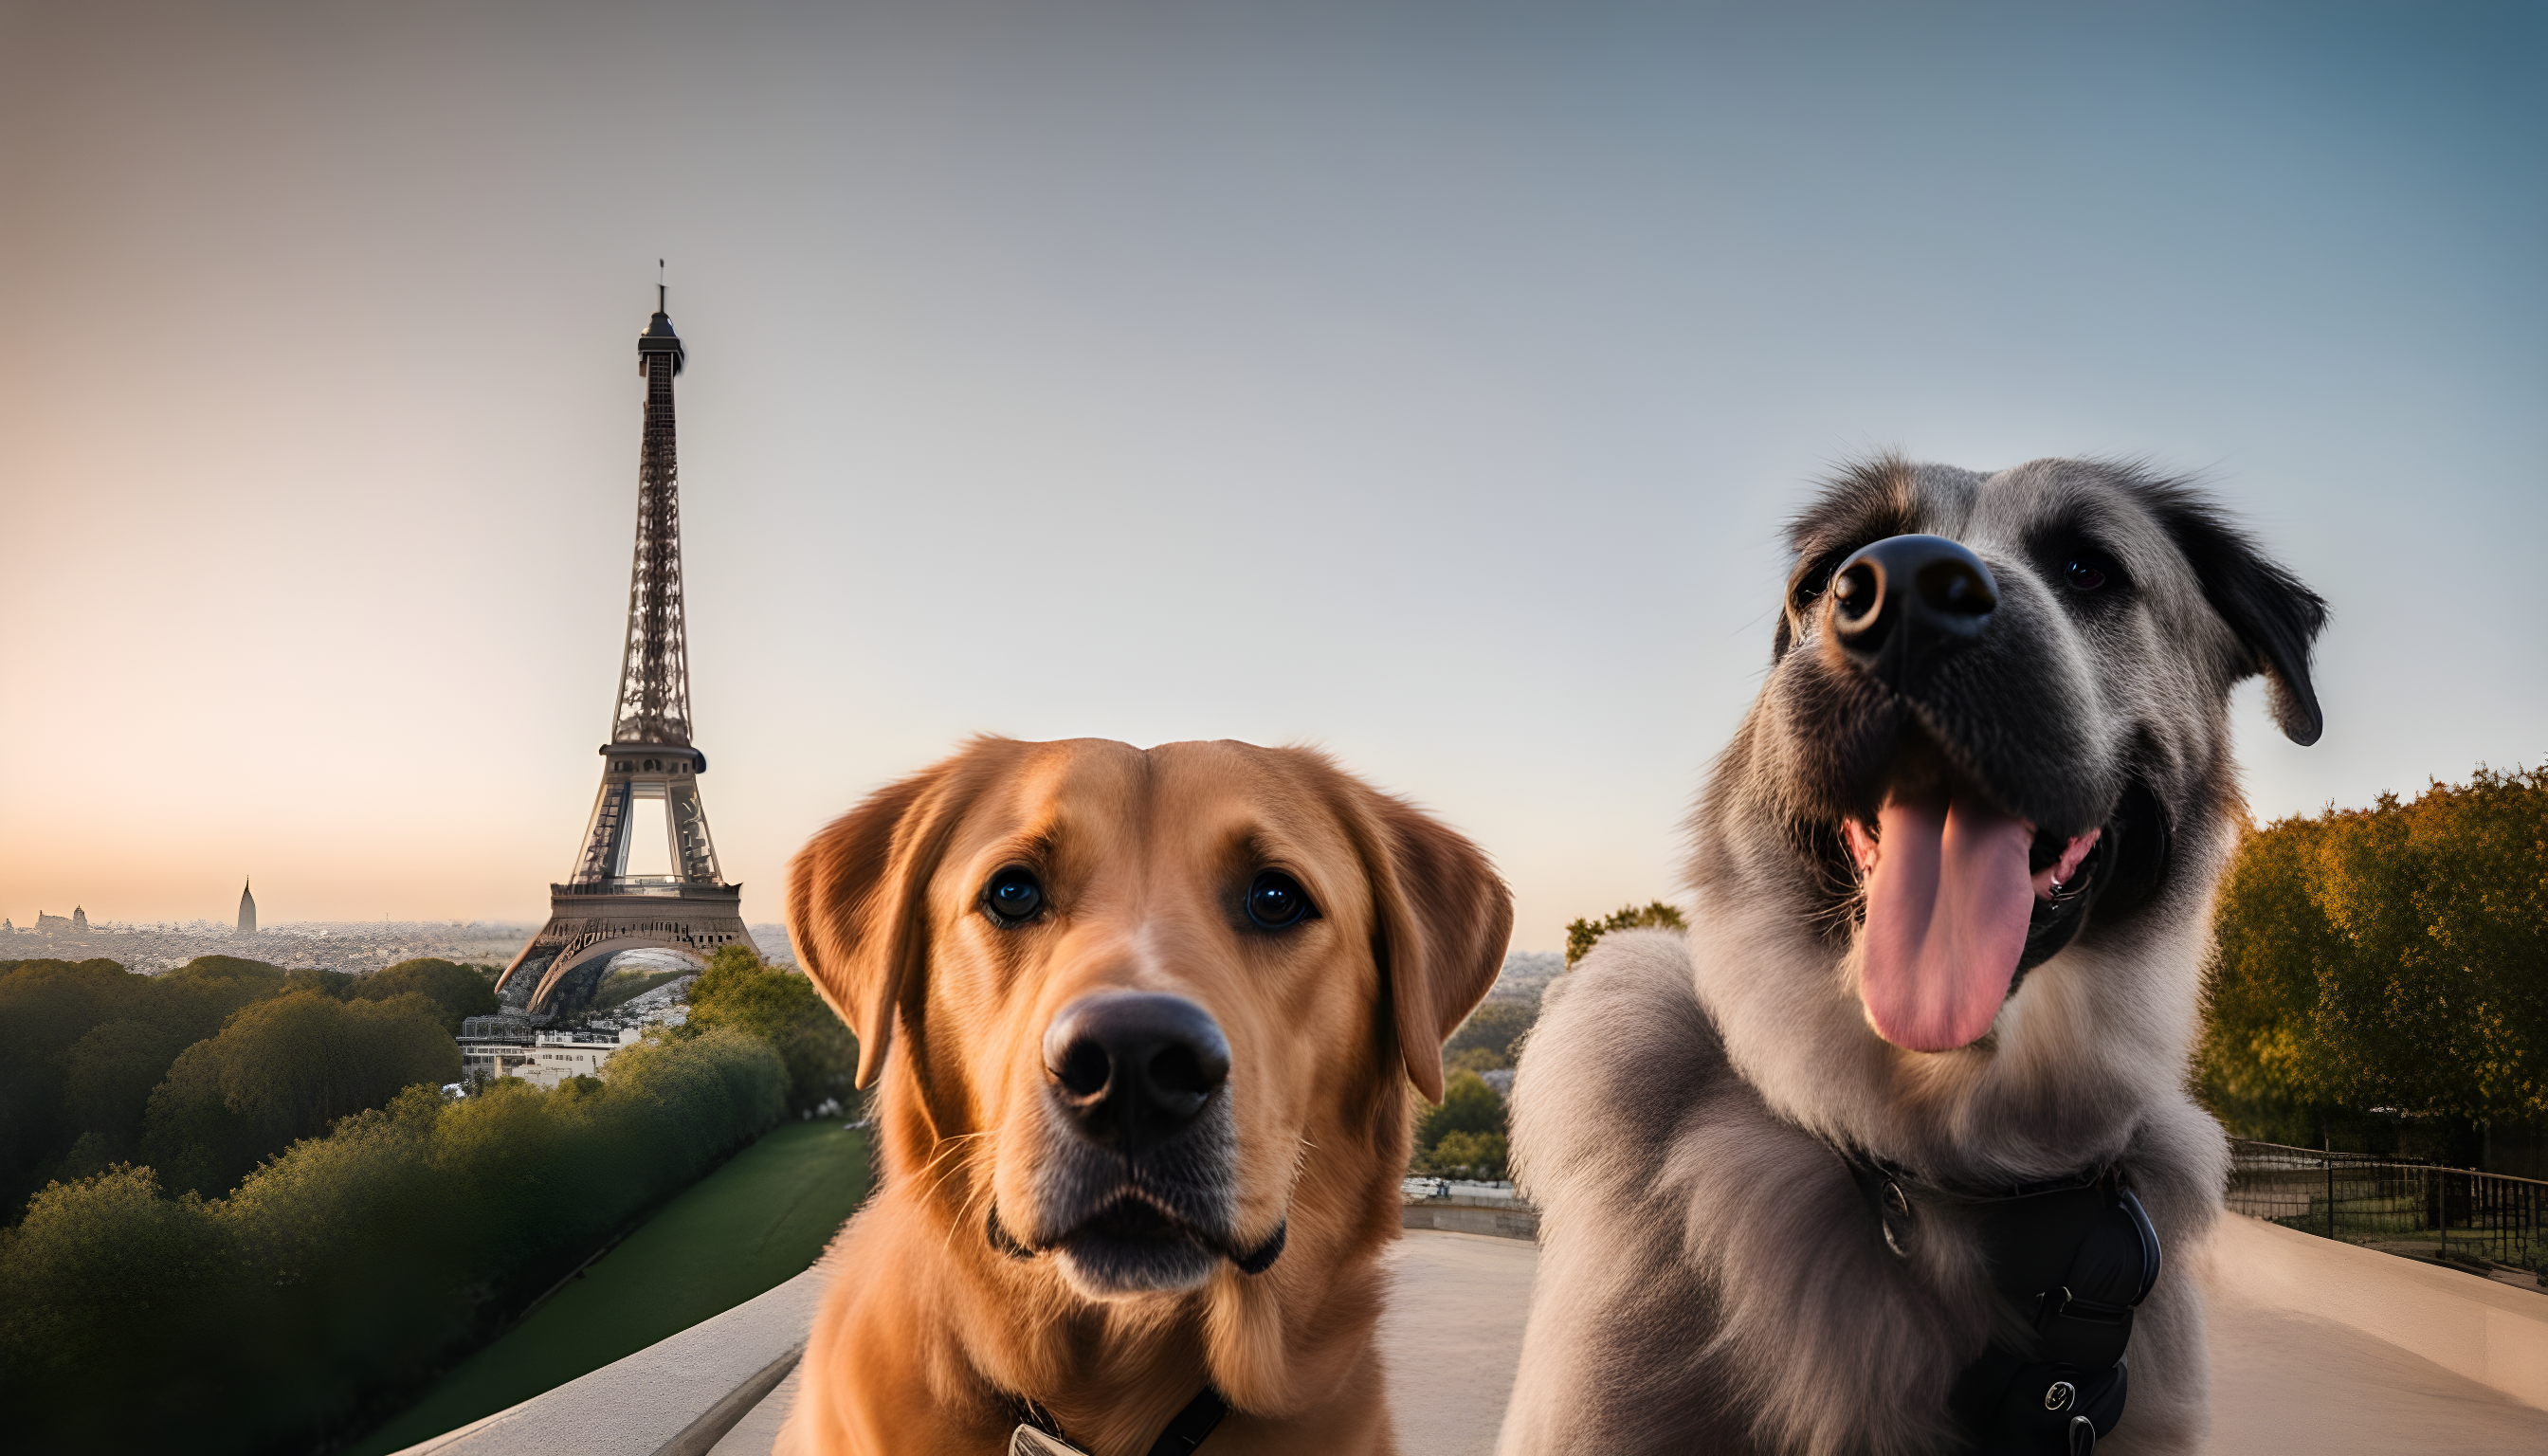 British Lab taking a selfie with the Eiffel Tower in the background.